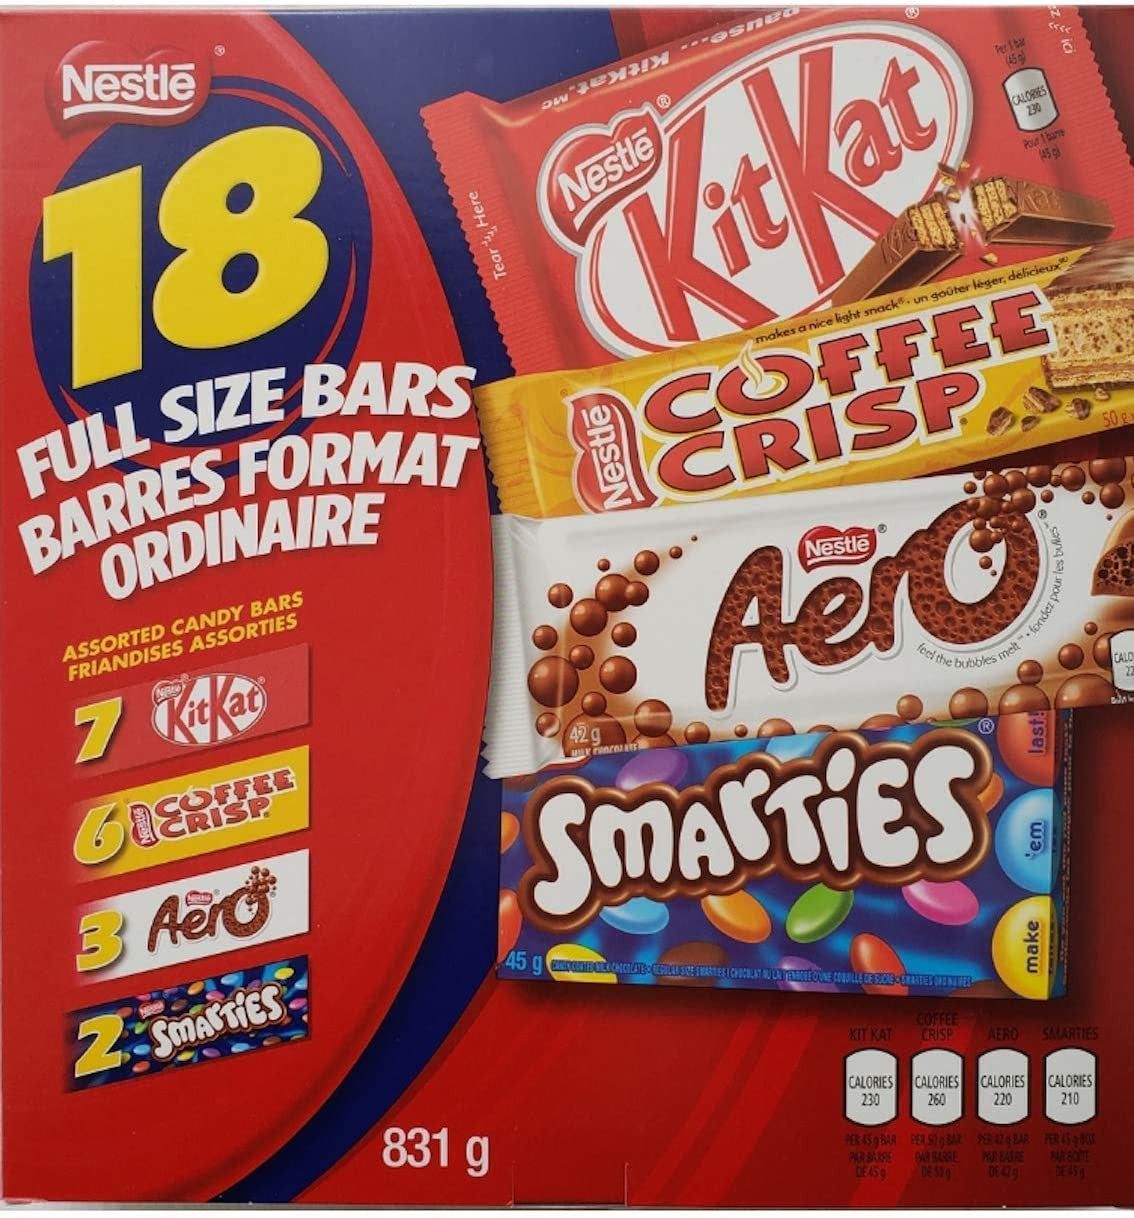 Nestle Full Size Assorted Chocolates Bars, Coffee Crisp, Kit Kat, Smarties, Aero, 18ct, Variety Pack, 831g/1.8 lbs. Box {Imported from Canada}